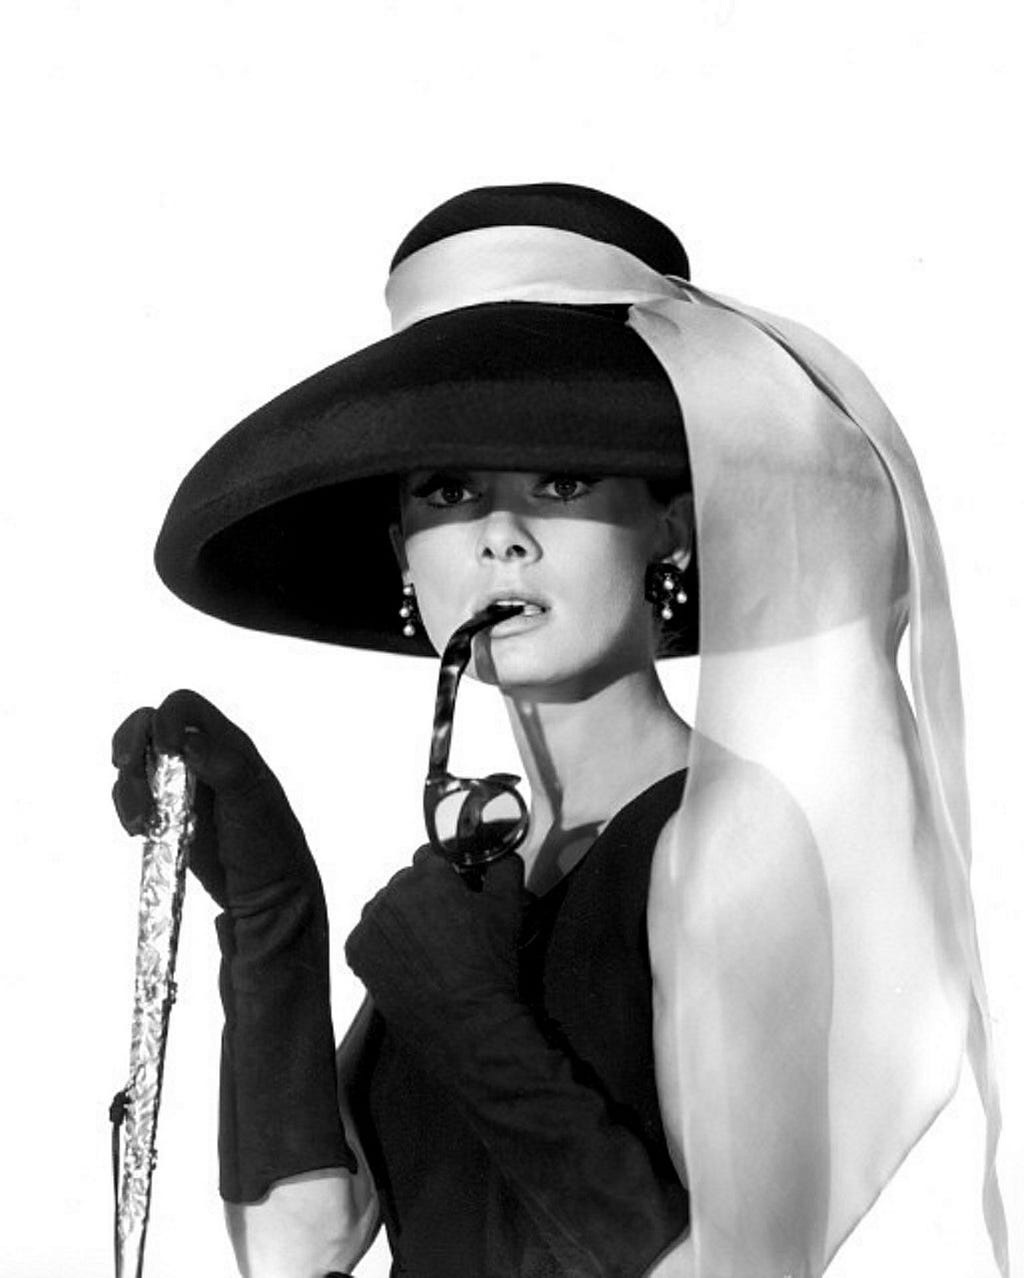 Headshot of Audrey Hepburn. She is wearing long black gloves, a black dress, and a black hat with a light-colored scarf.